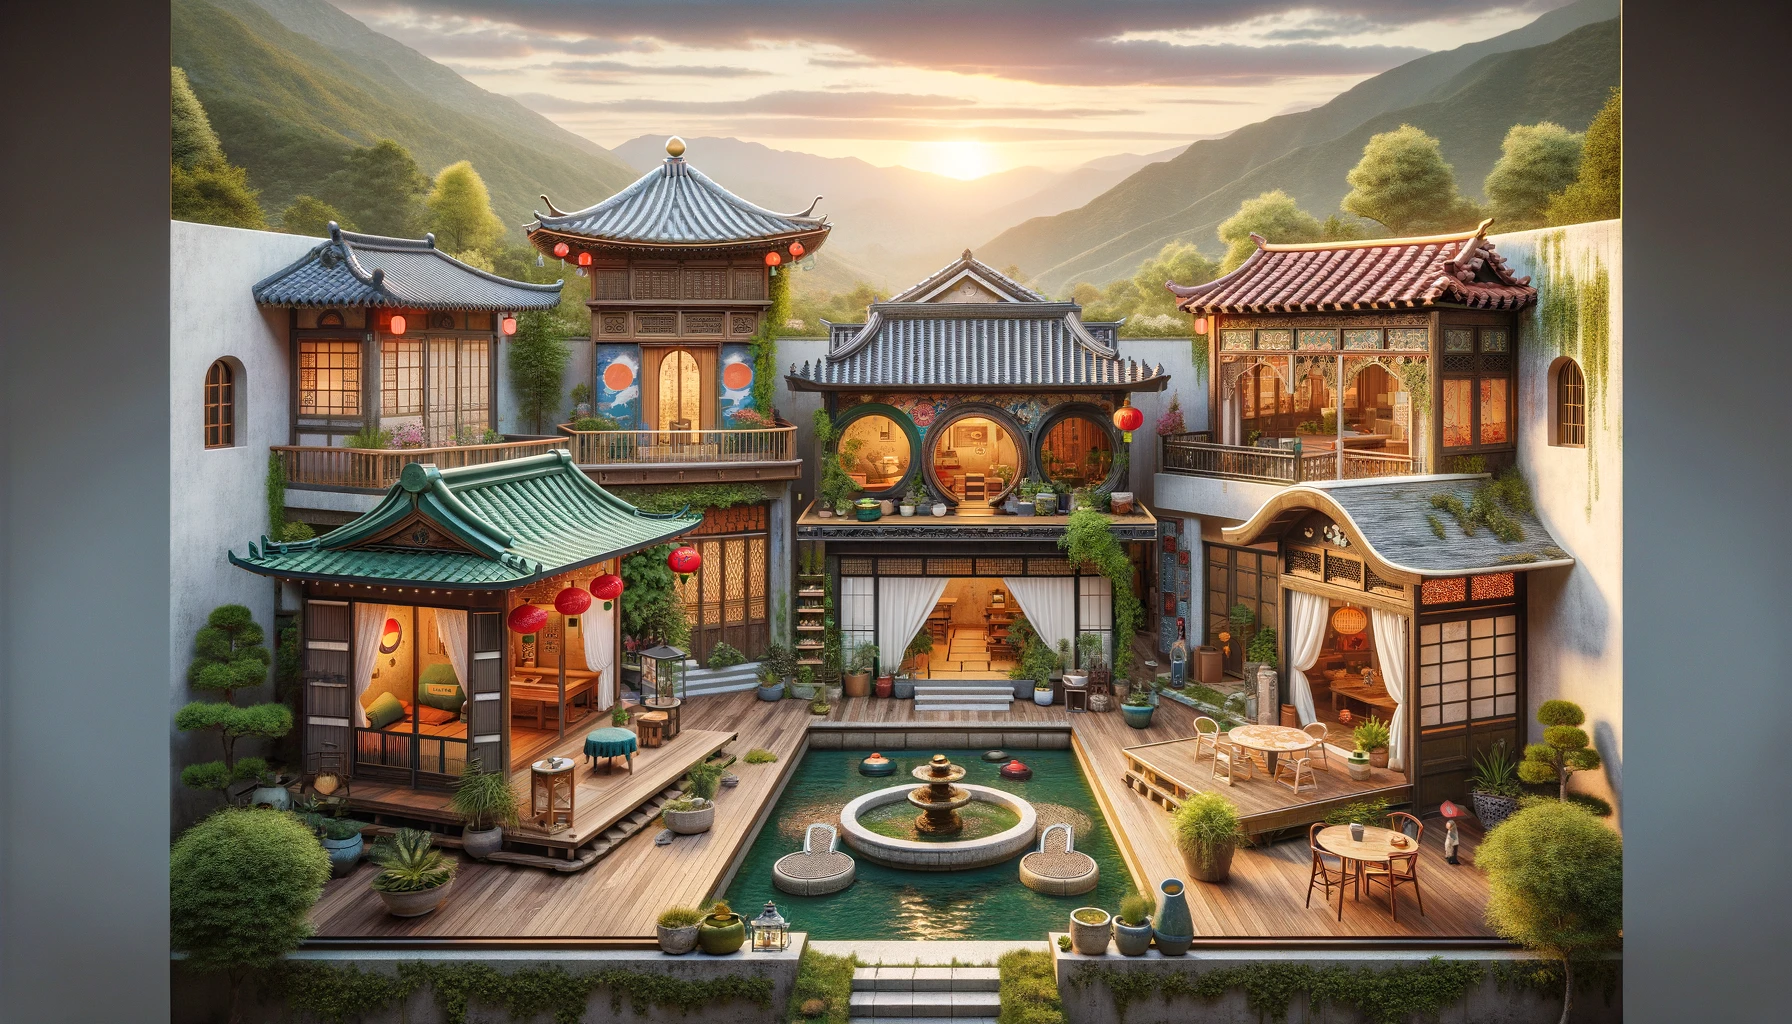 A panoramic view showcasing a variety of traditional tea houses from different cultures around the world, including Japanese, Chinese, Moroccan